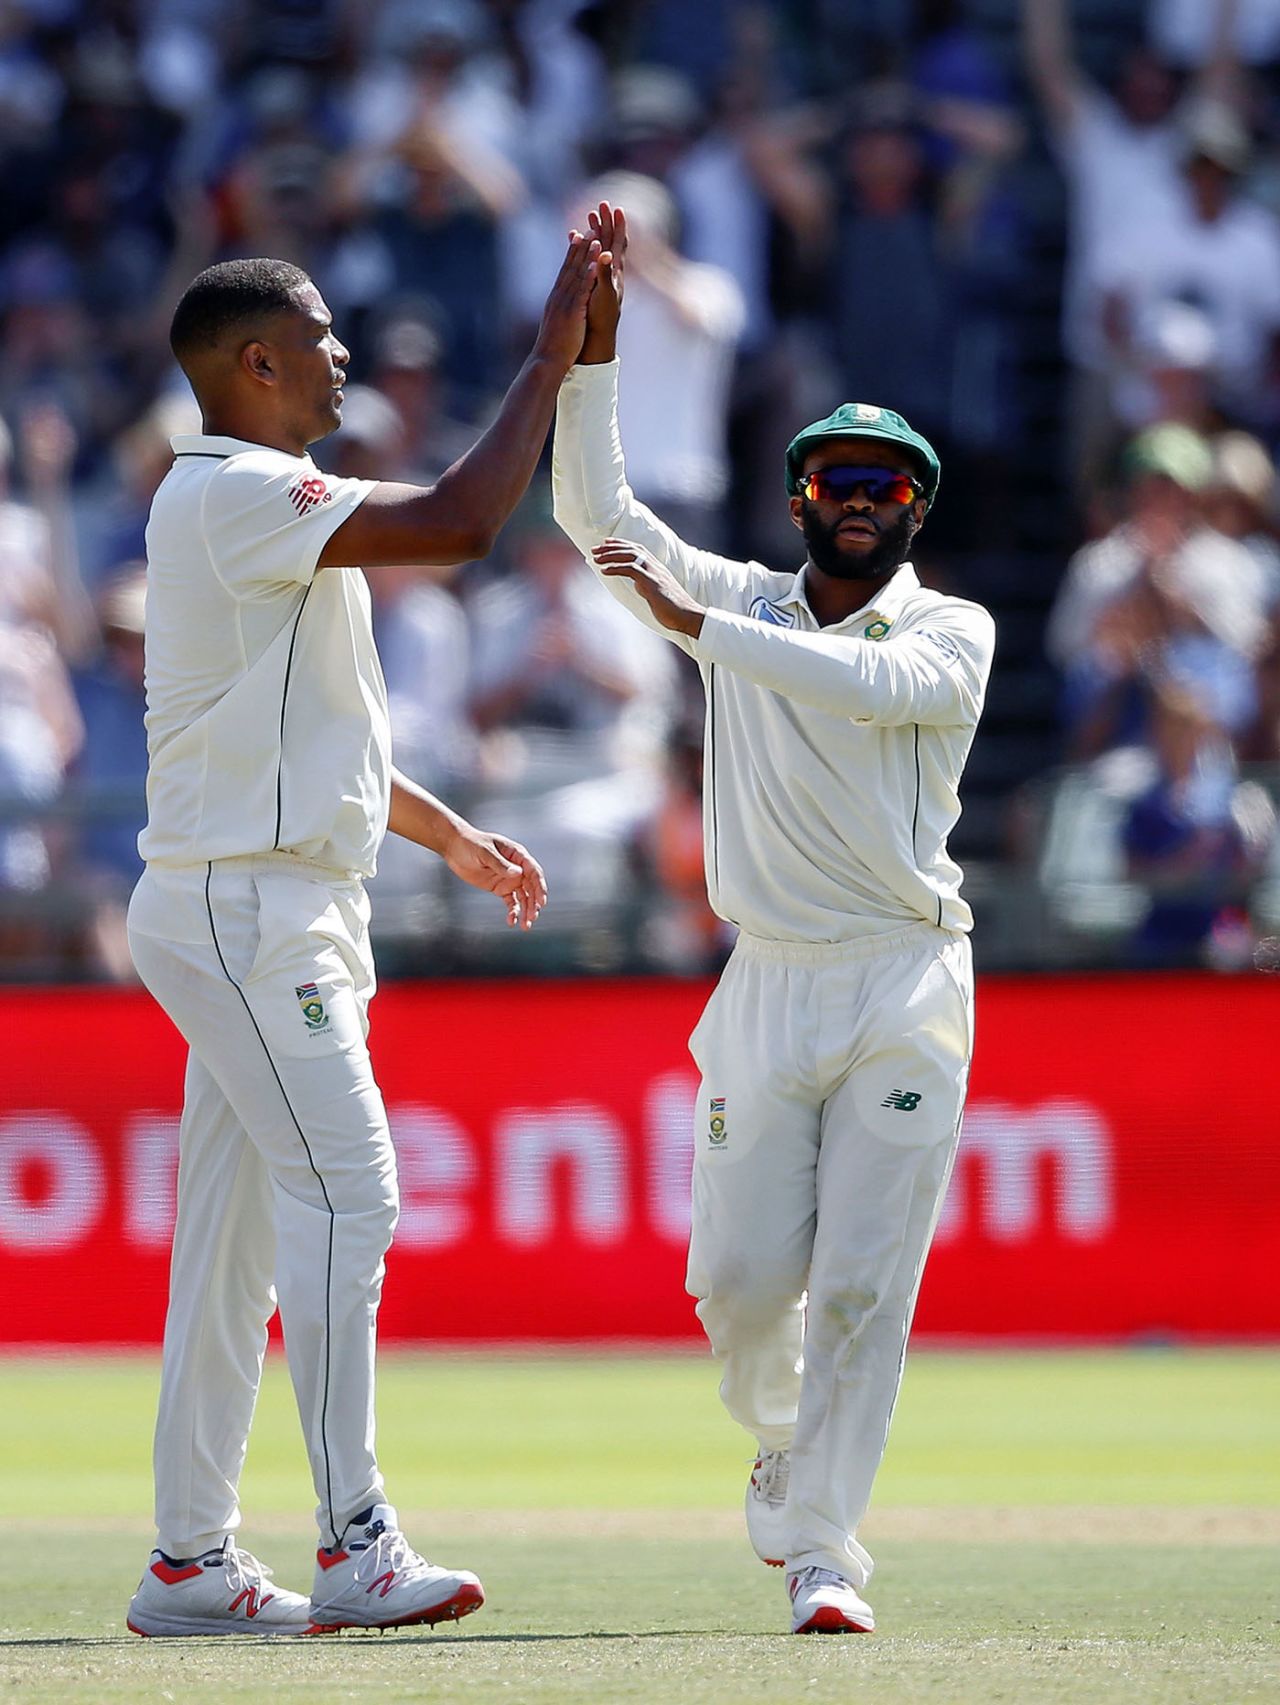 Vernon Philander chipped out Asad Shafiq, South Africa v Pakistan, 2nd Test, Cape Town, 3rd day, January 5, 2018